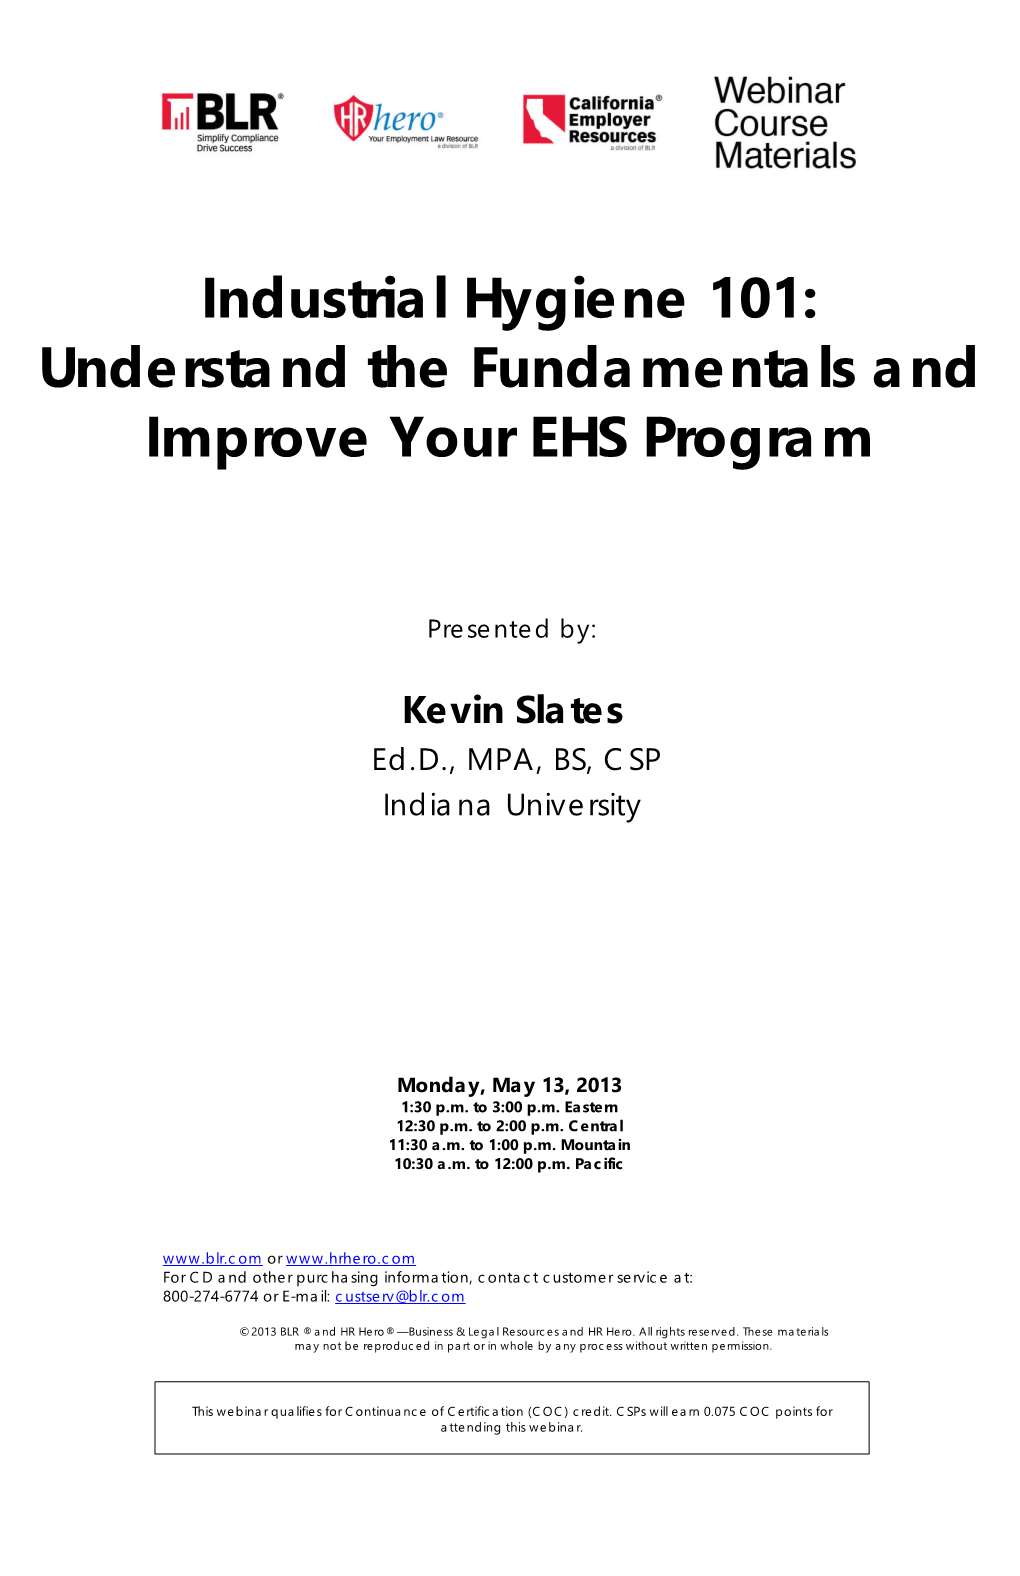 Industrial Hygiene 101: Understand the Fundamentals and Improve Your EHS Program